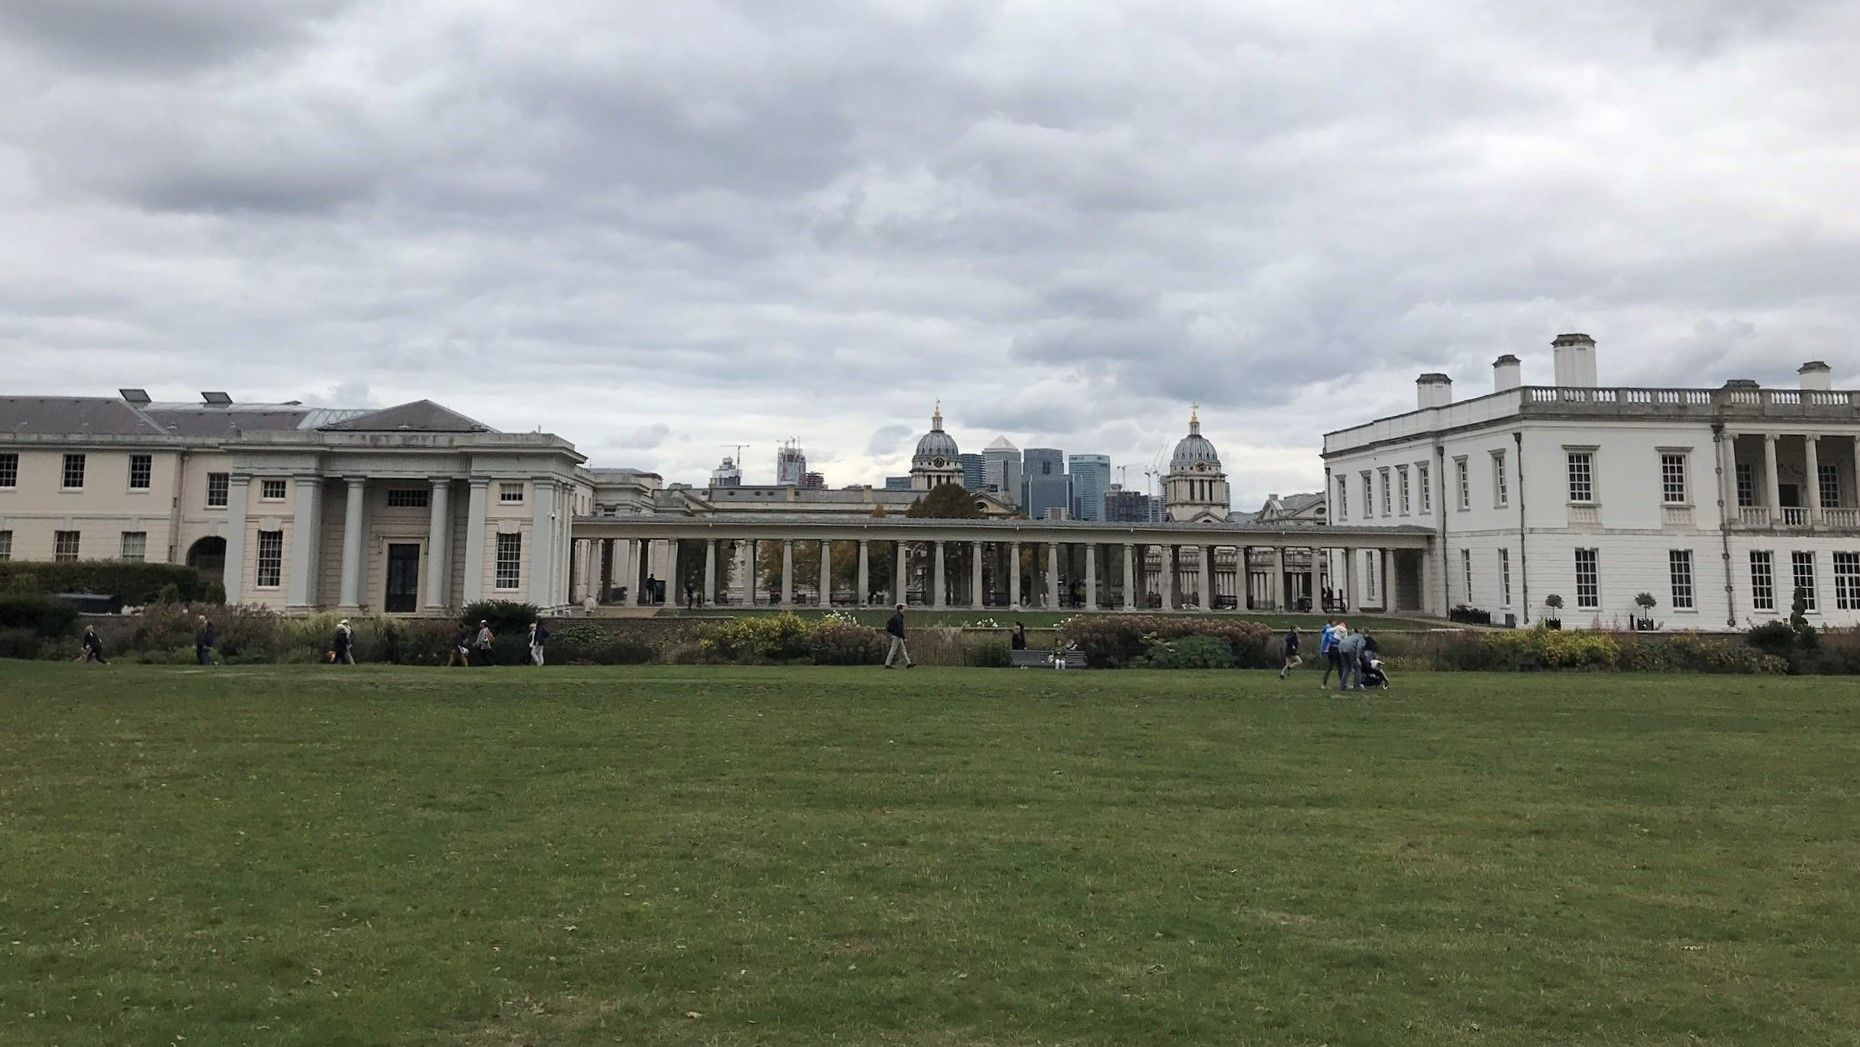 View of the Queen's House and London Skyline in the distance.